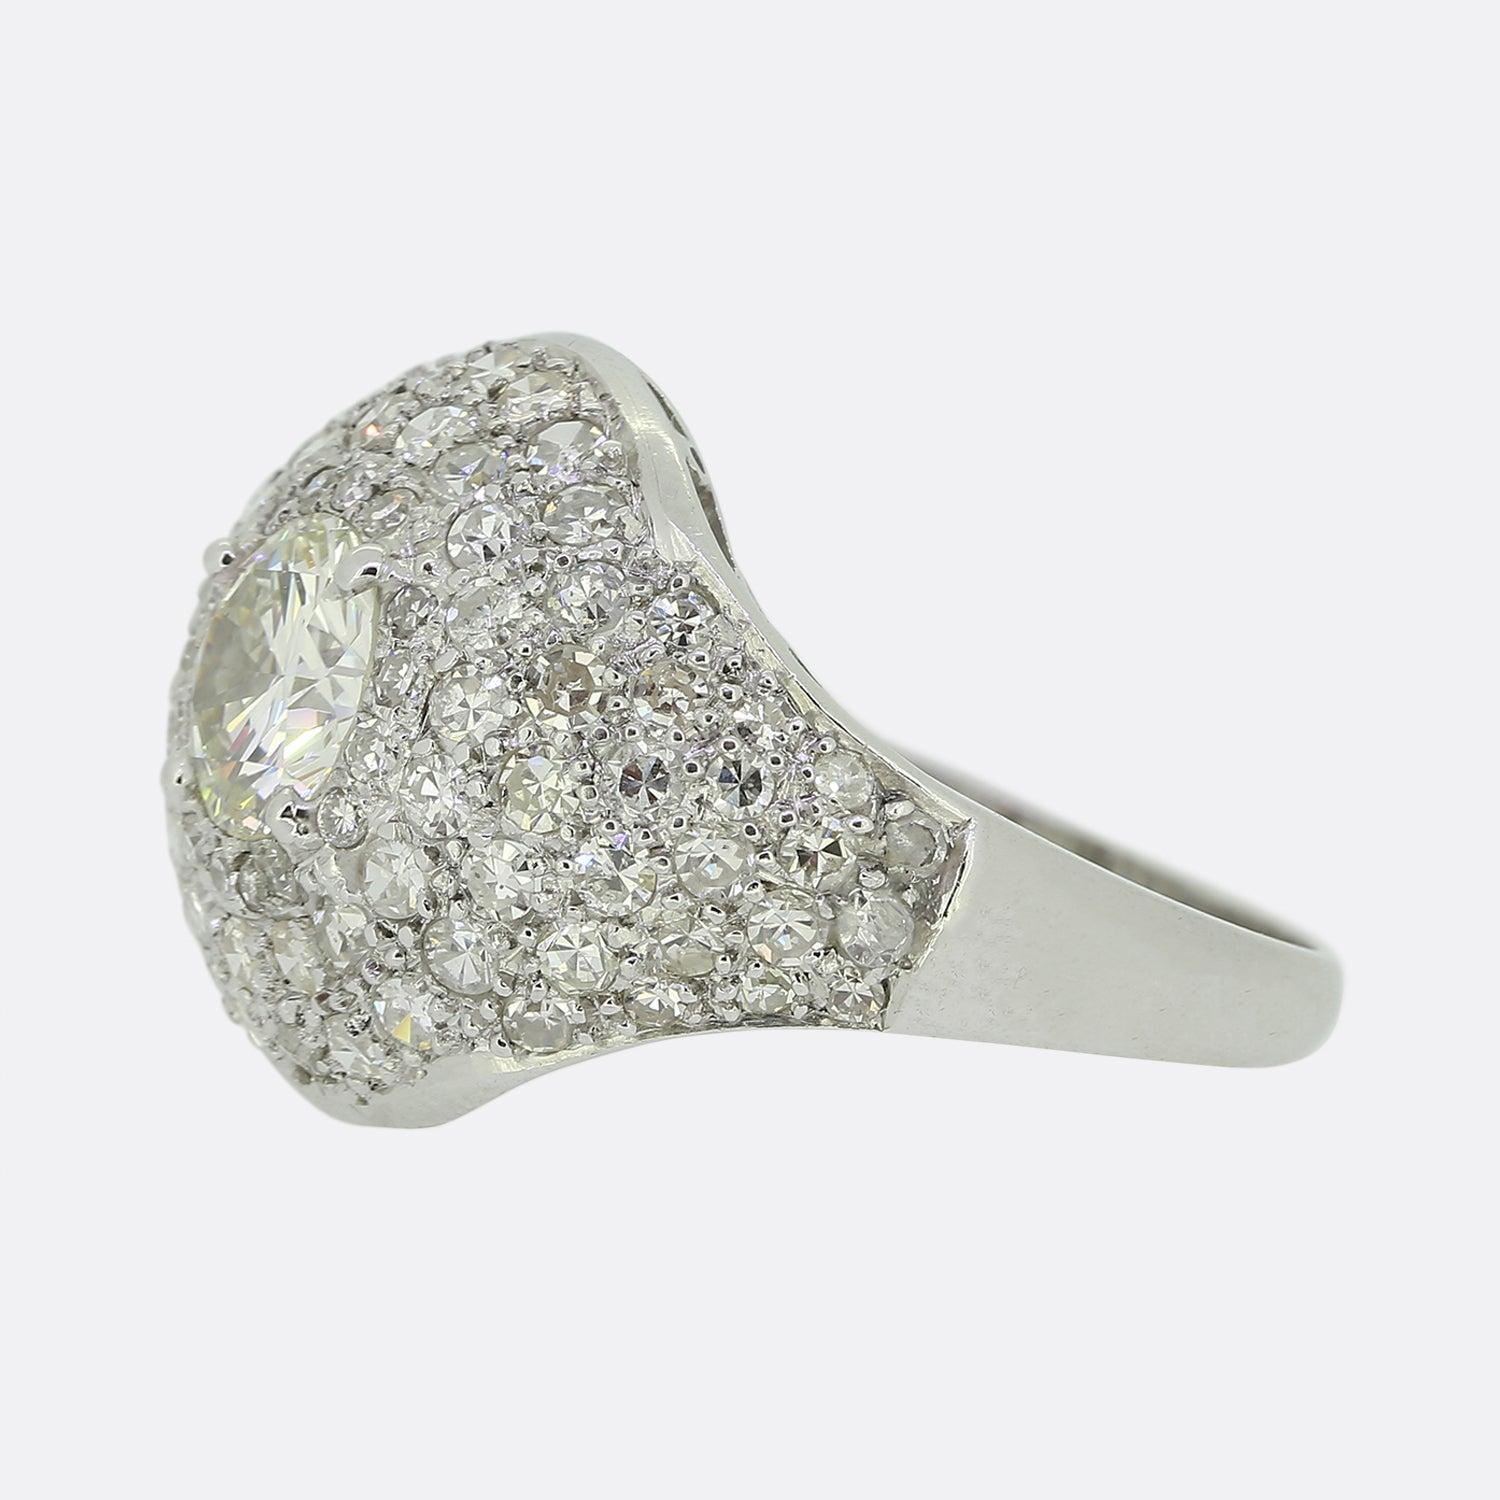 Here we have a scintillating vintage diamond bombe ring excellently exemplifying a style which was popularised in the 1920s. This ring features a centralised round brilliant cut diamond in a four clawed setting at the centre of the face. This